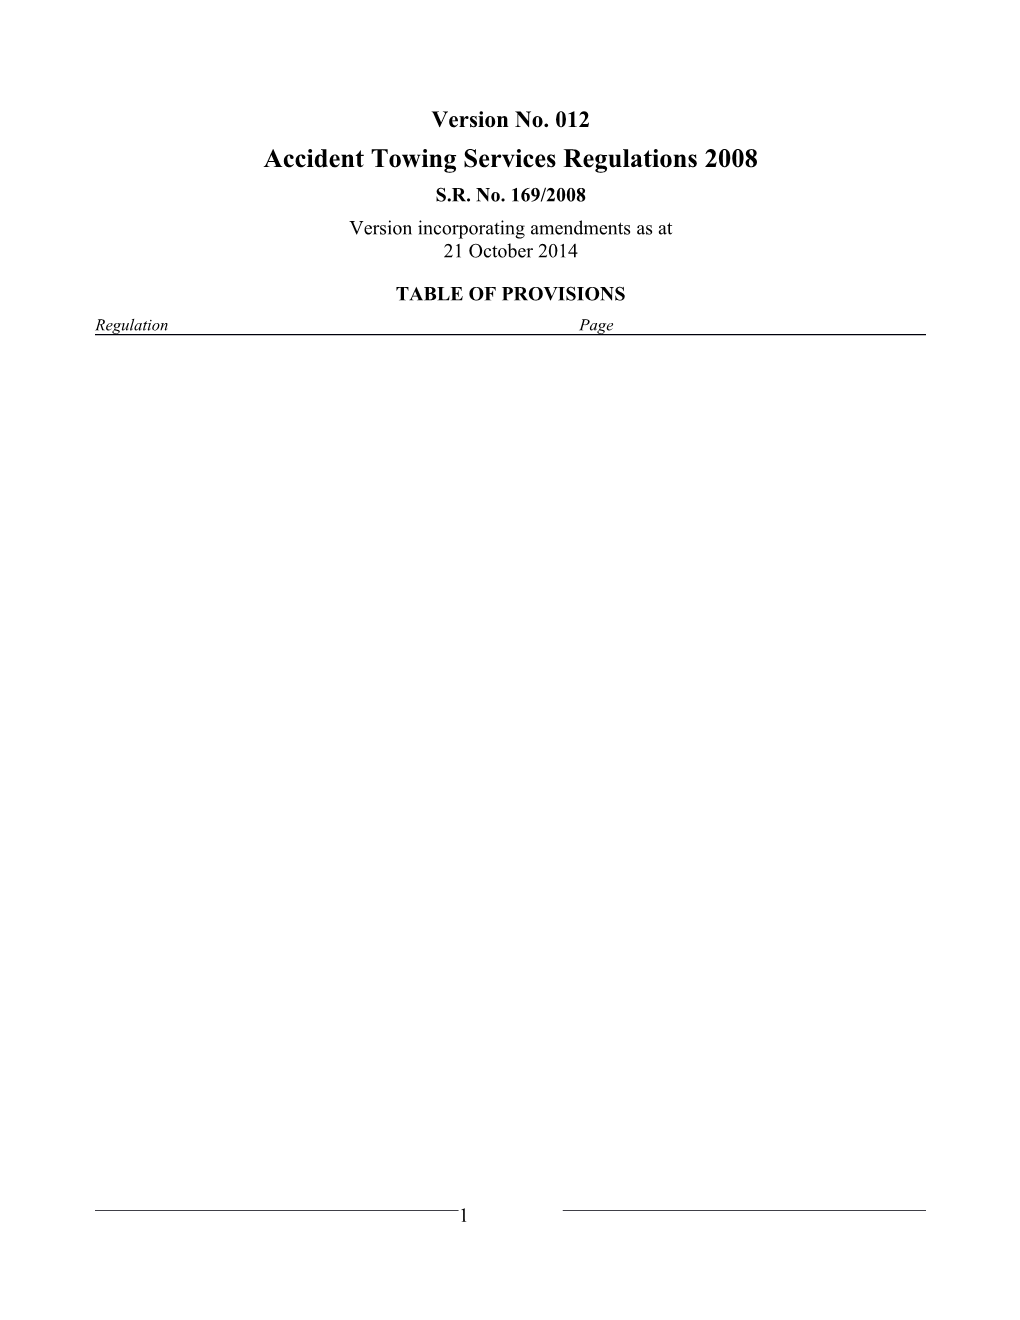 Accident Towing Services Regulations 2008